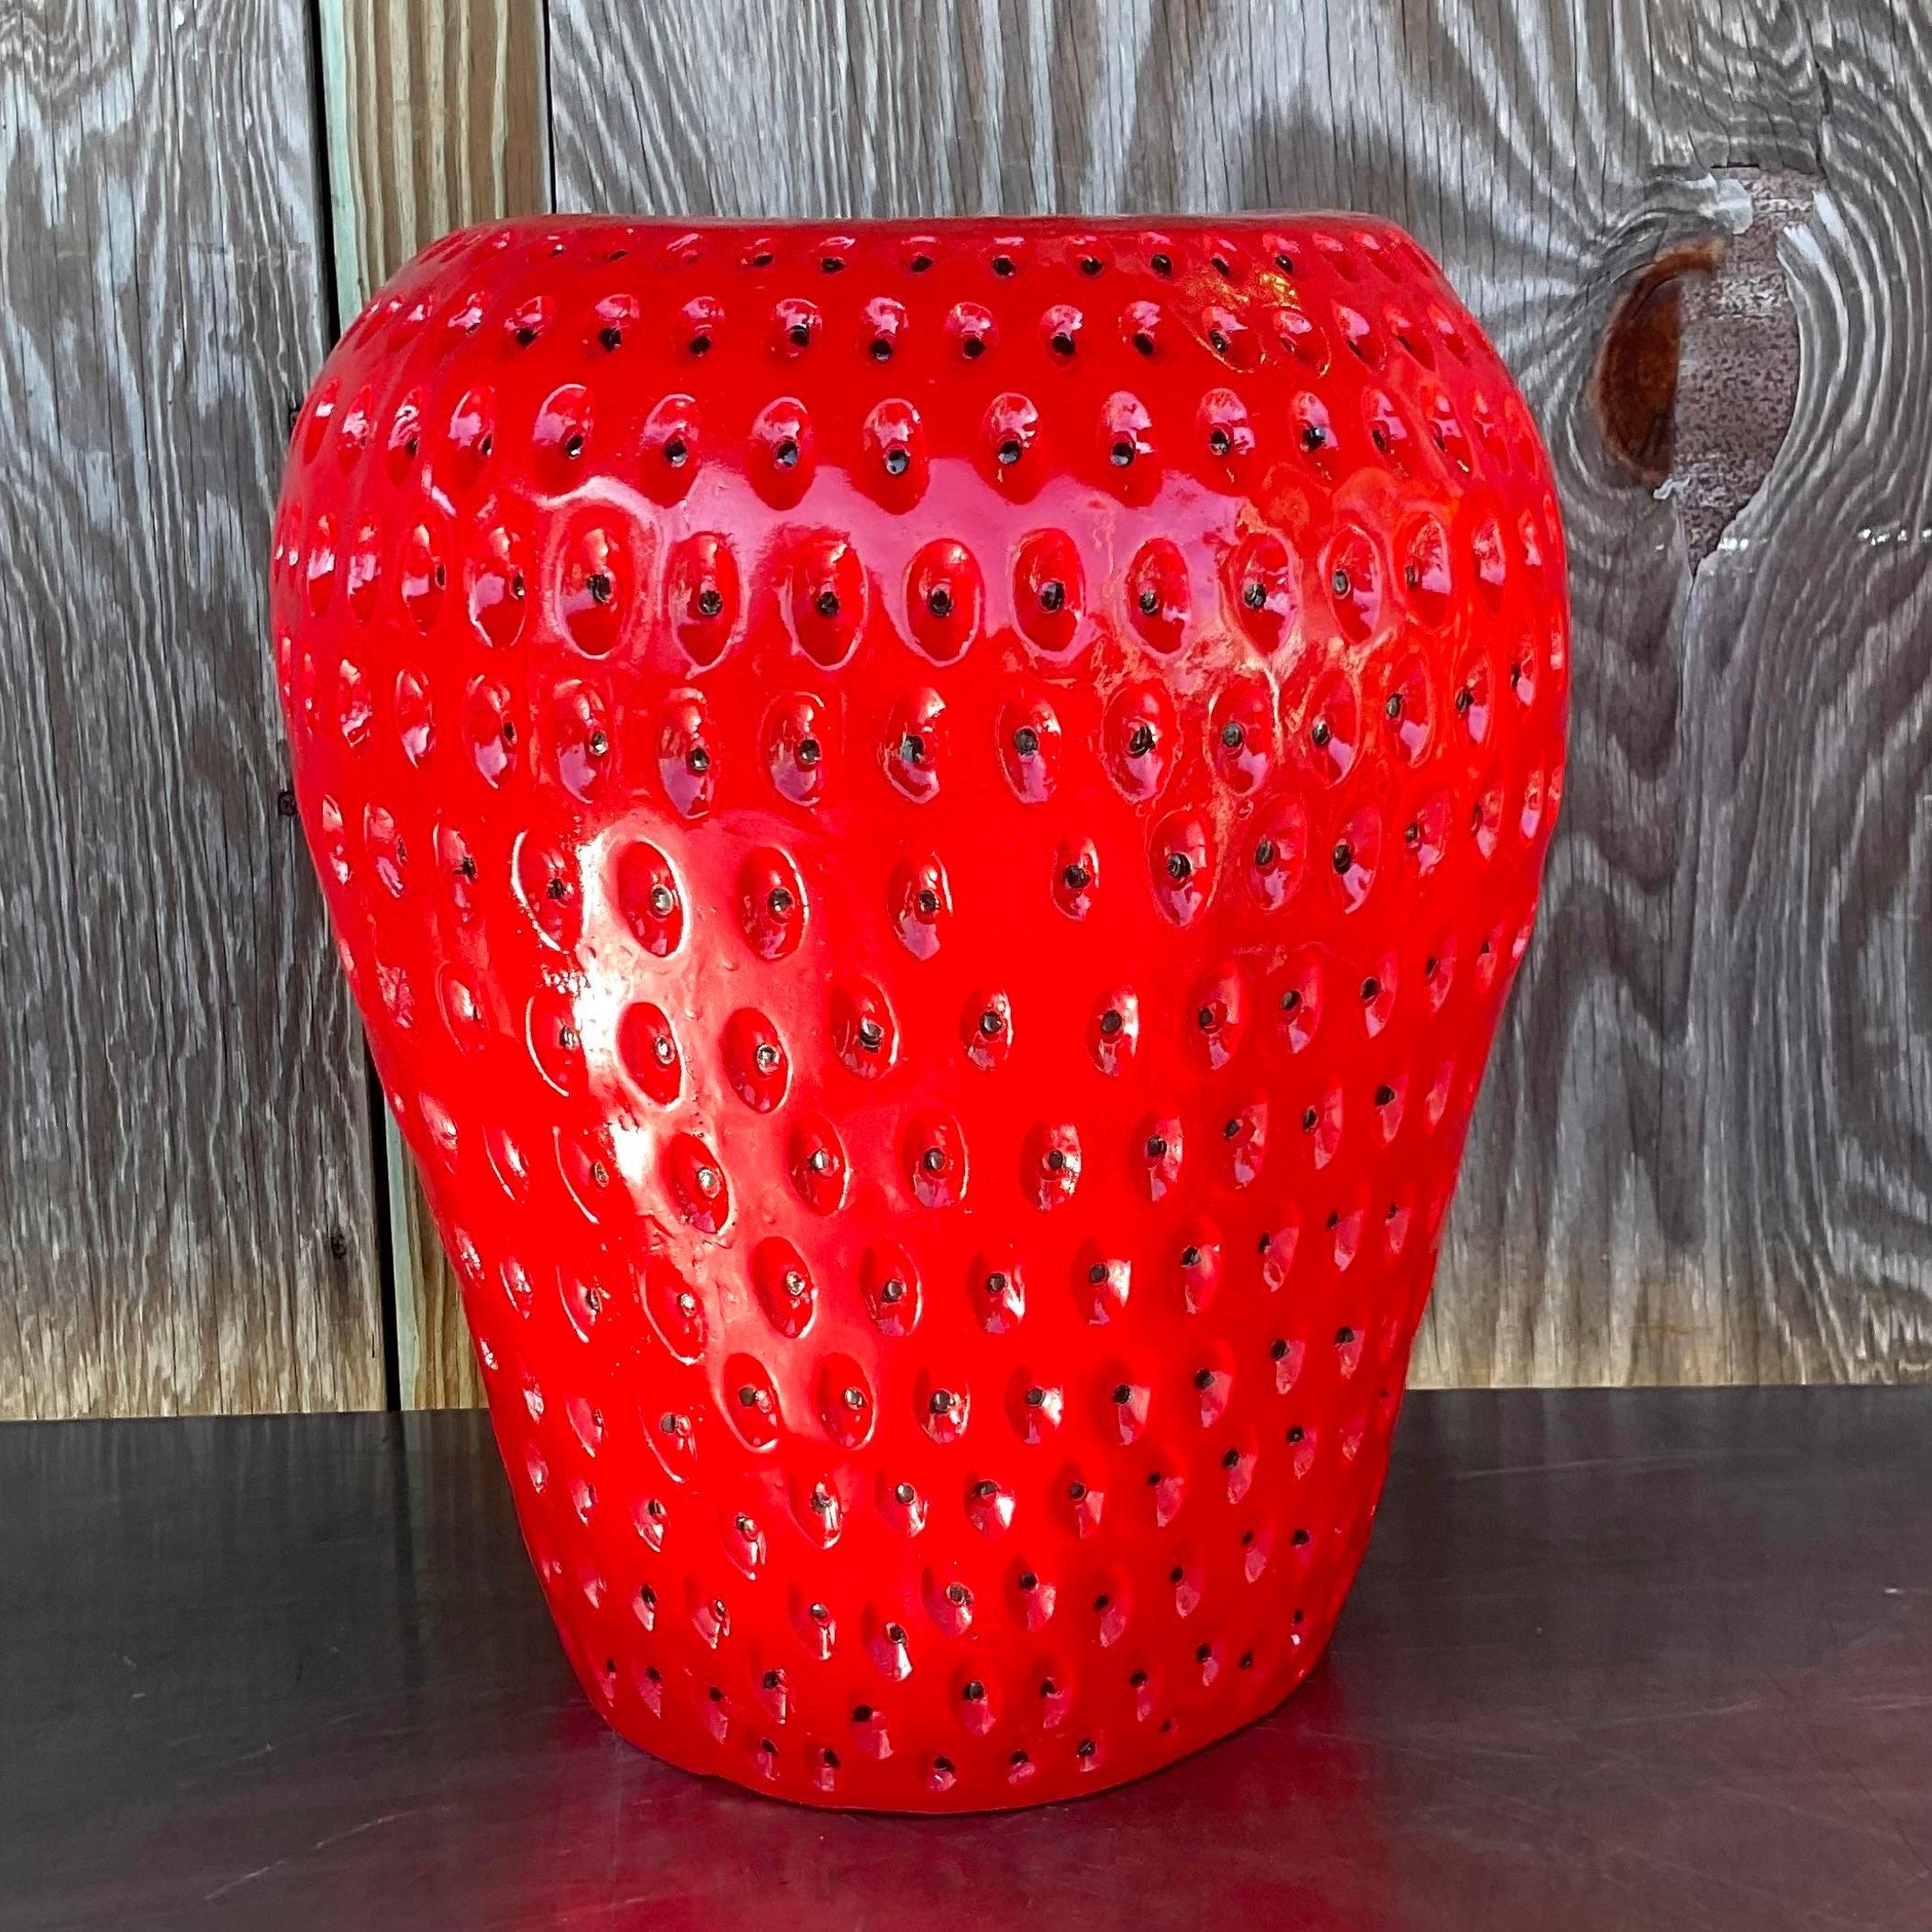 A fabulous vintage Boho low stool. A great big strawberry with incredible attention to detail. A glazed ceramic finish on a brightly colored paint. Coordinating stools also available on my page. Acquired from a Palm Beach estate.